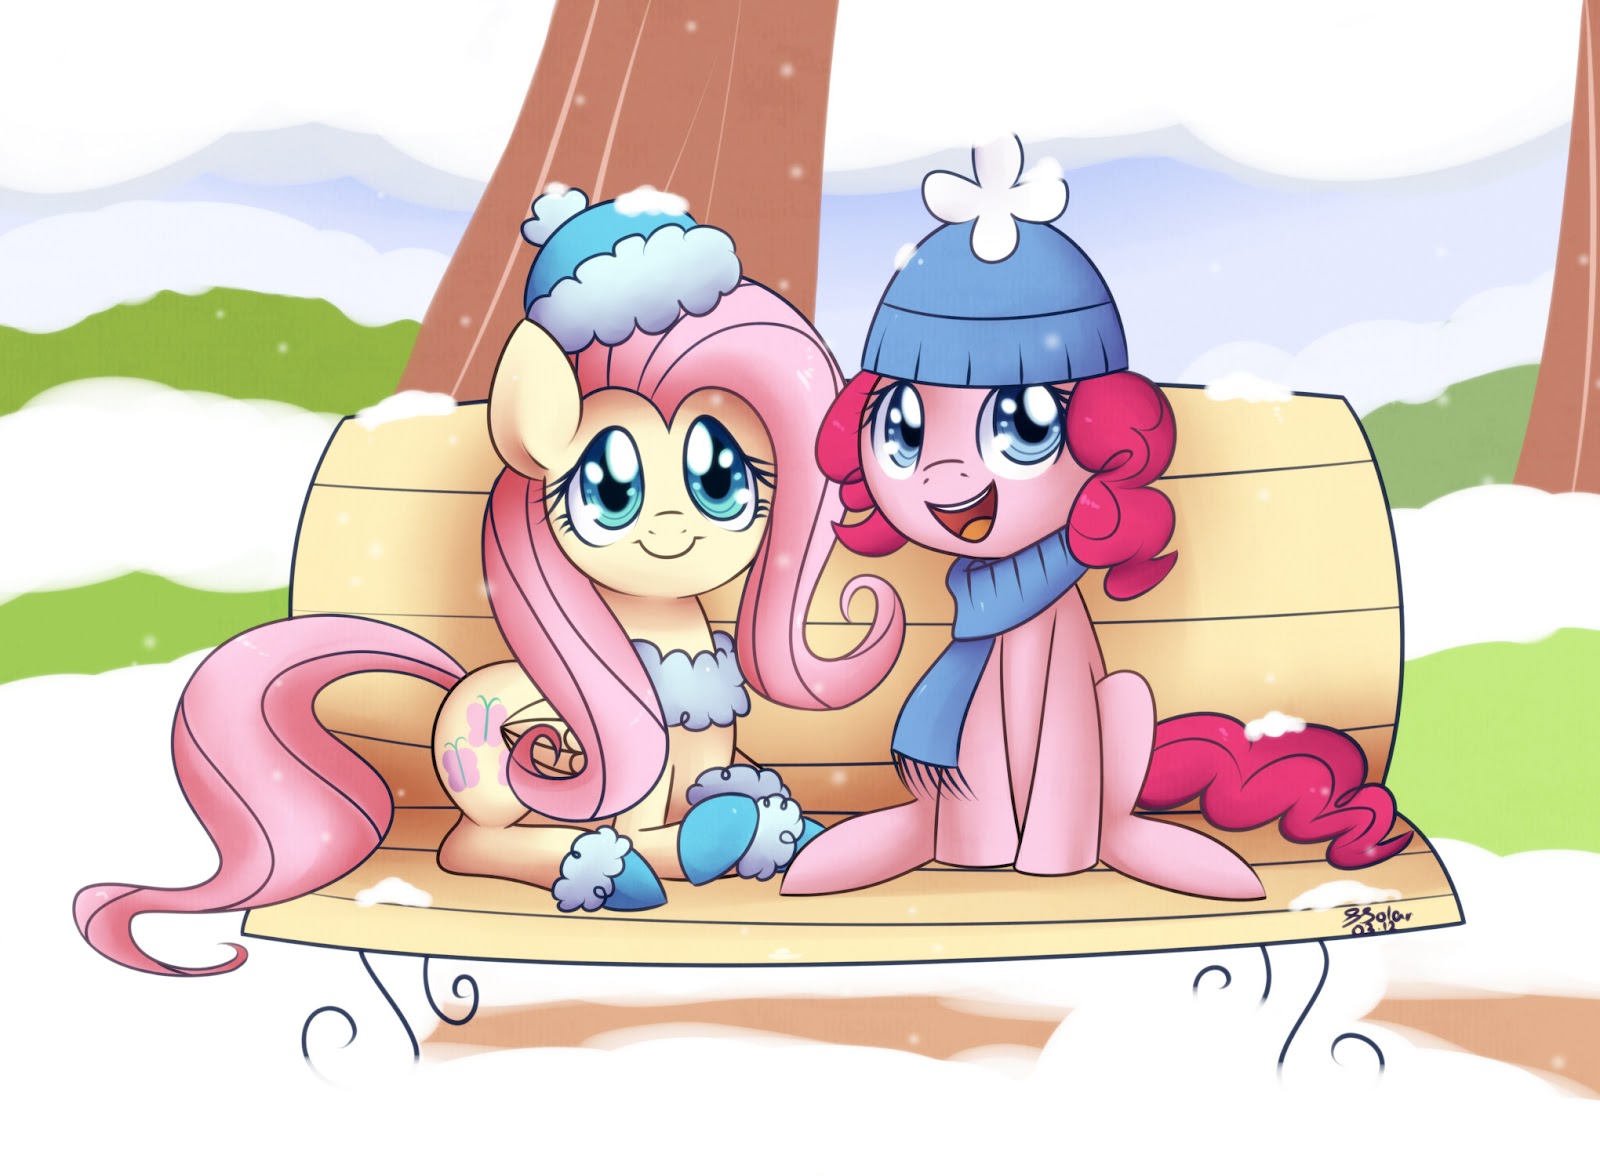 Funny pictures, videos and other media thread! - Page 12 153735+-+artist+soapie-solar+artist+solar-slash+cute+fluttershy+pinkie_pie+scarf+snow+winter